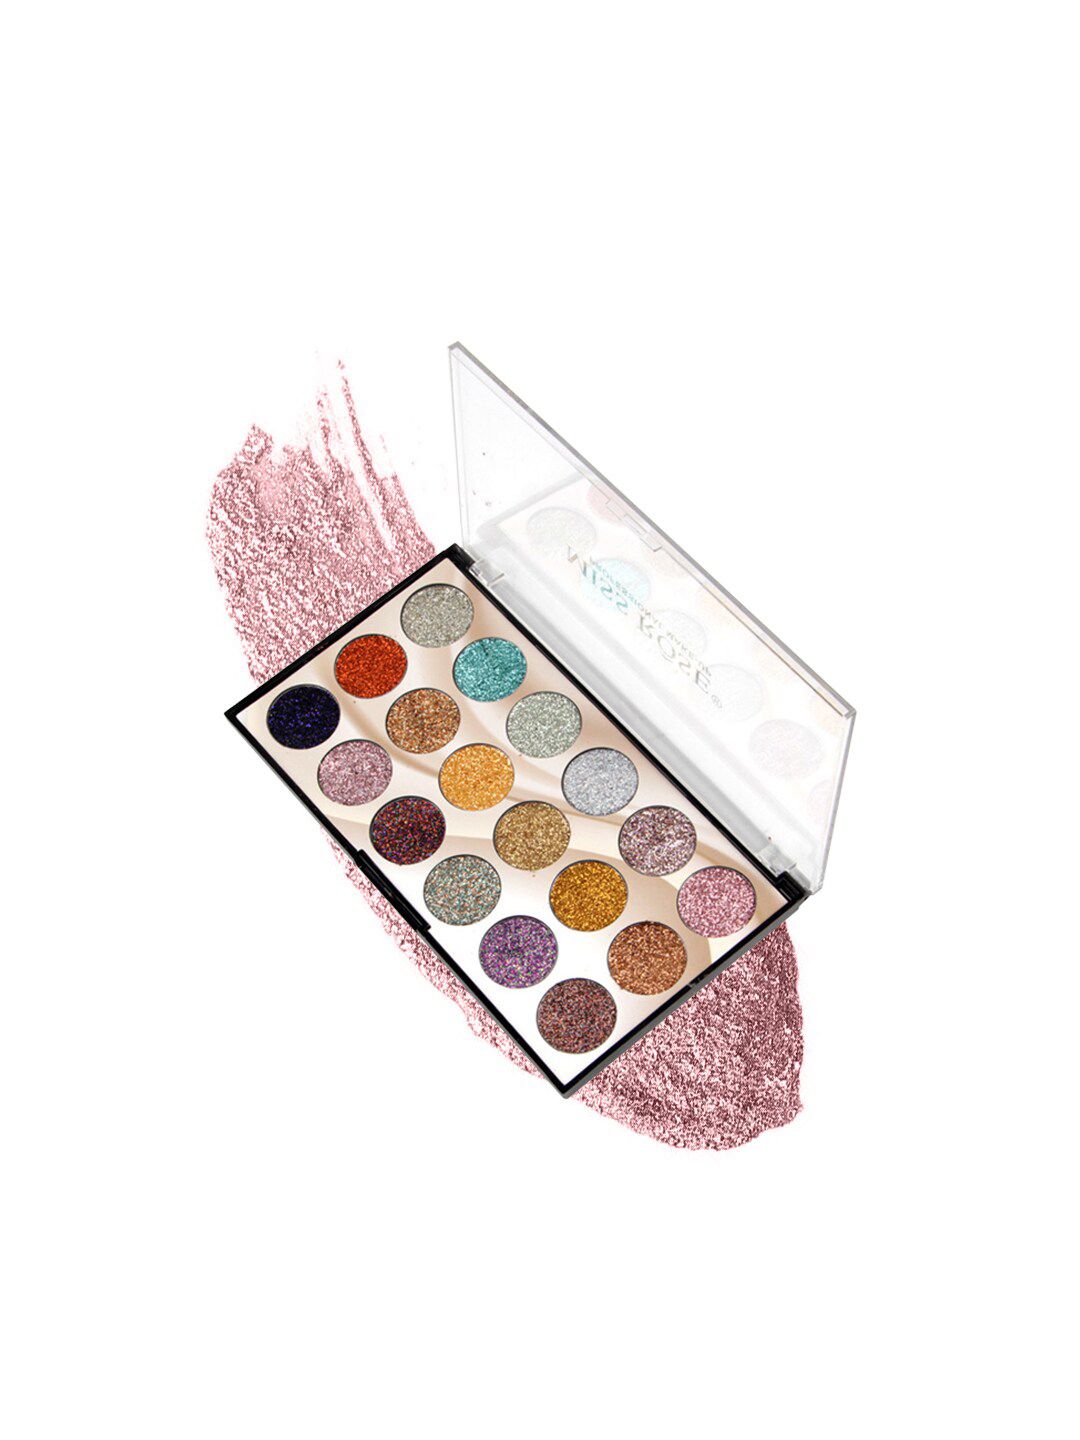 MISS ROSE 18 Color Glitter Eyeshadow Palette 7001-83 M2 Price in India